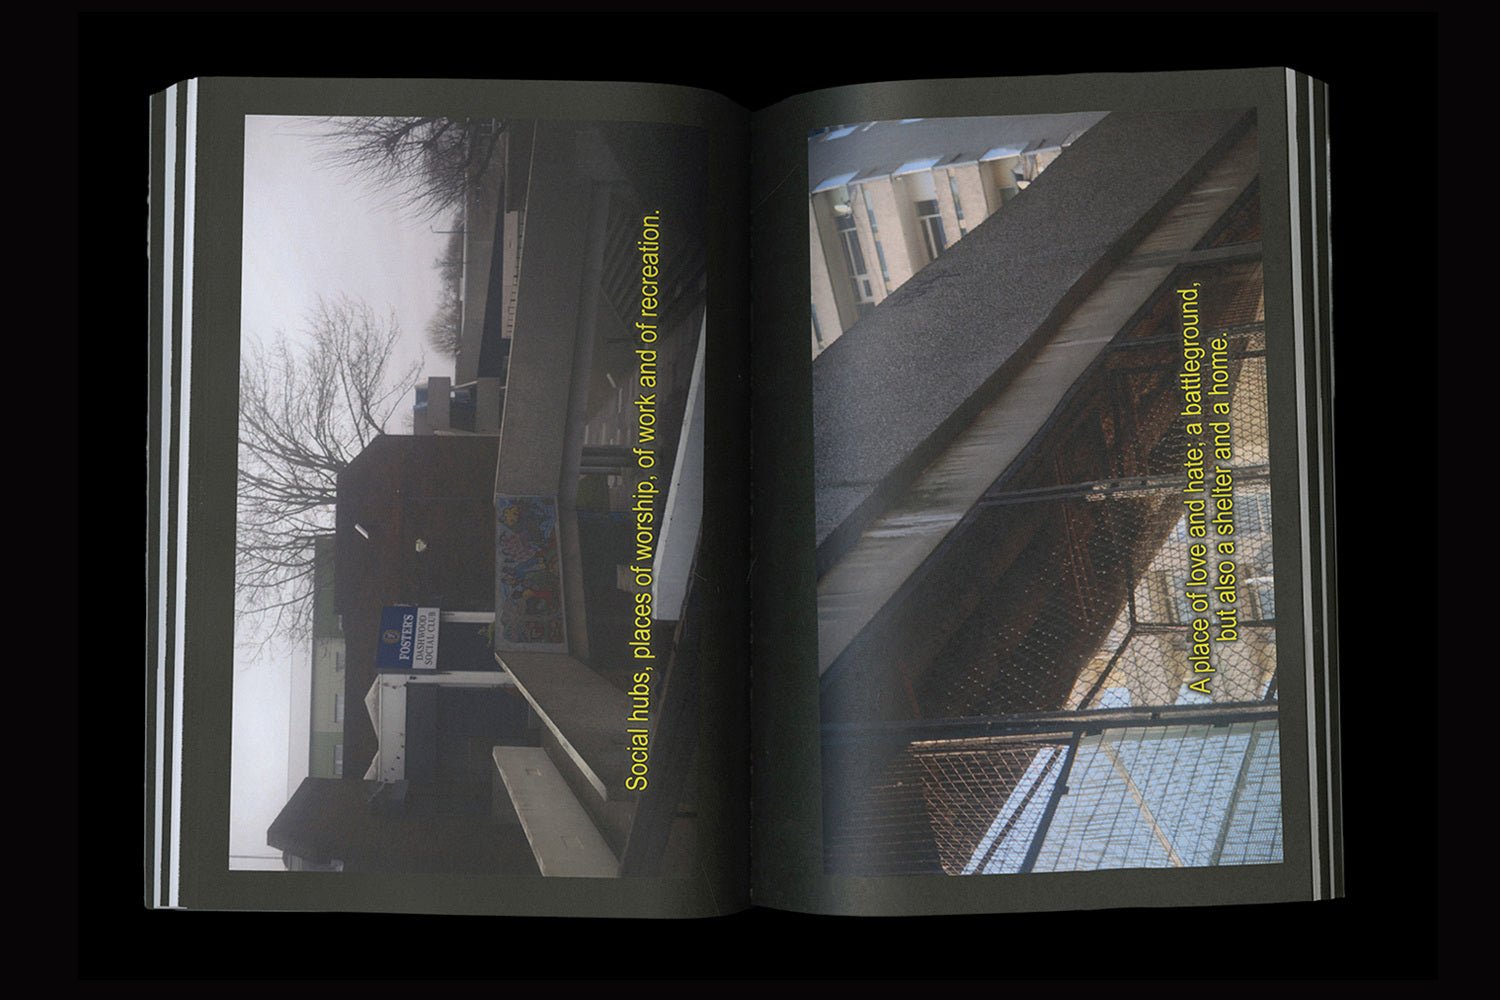 At The Heart Of The Crystal Expanse-Thamesmead-urbanism-Artist Book-TACO! -Liam Johnstone